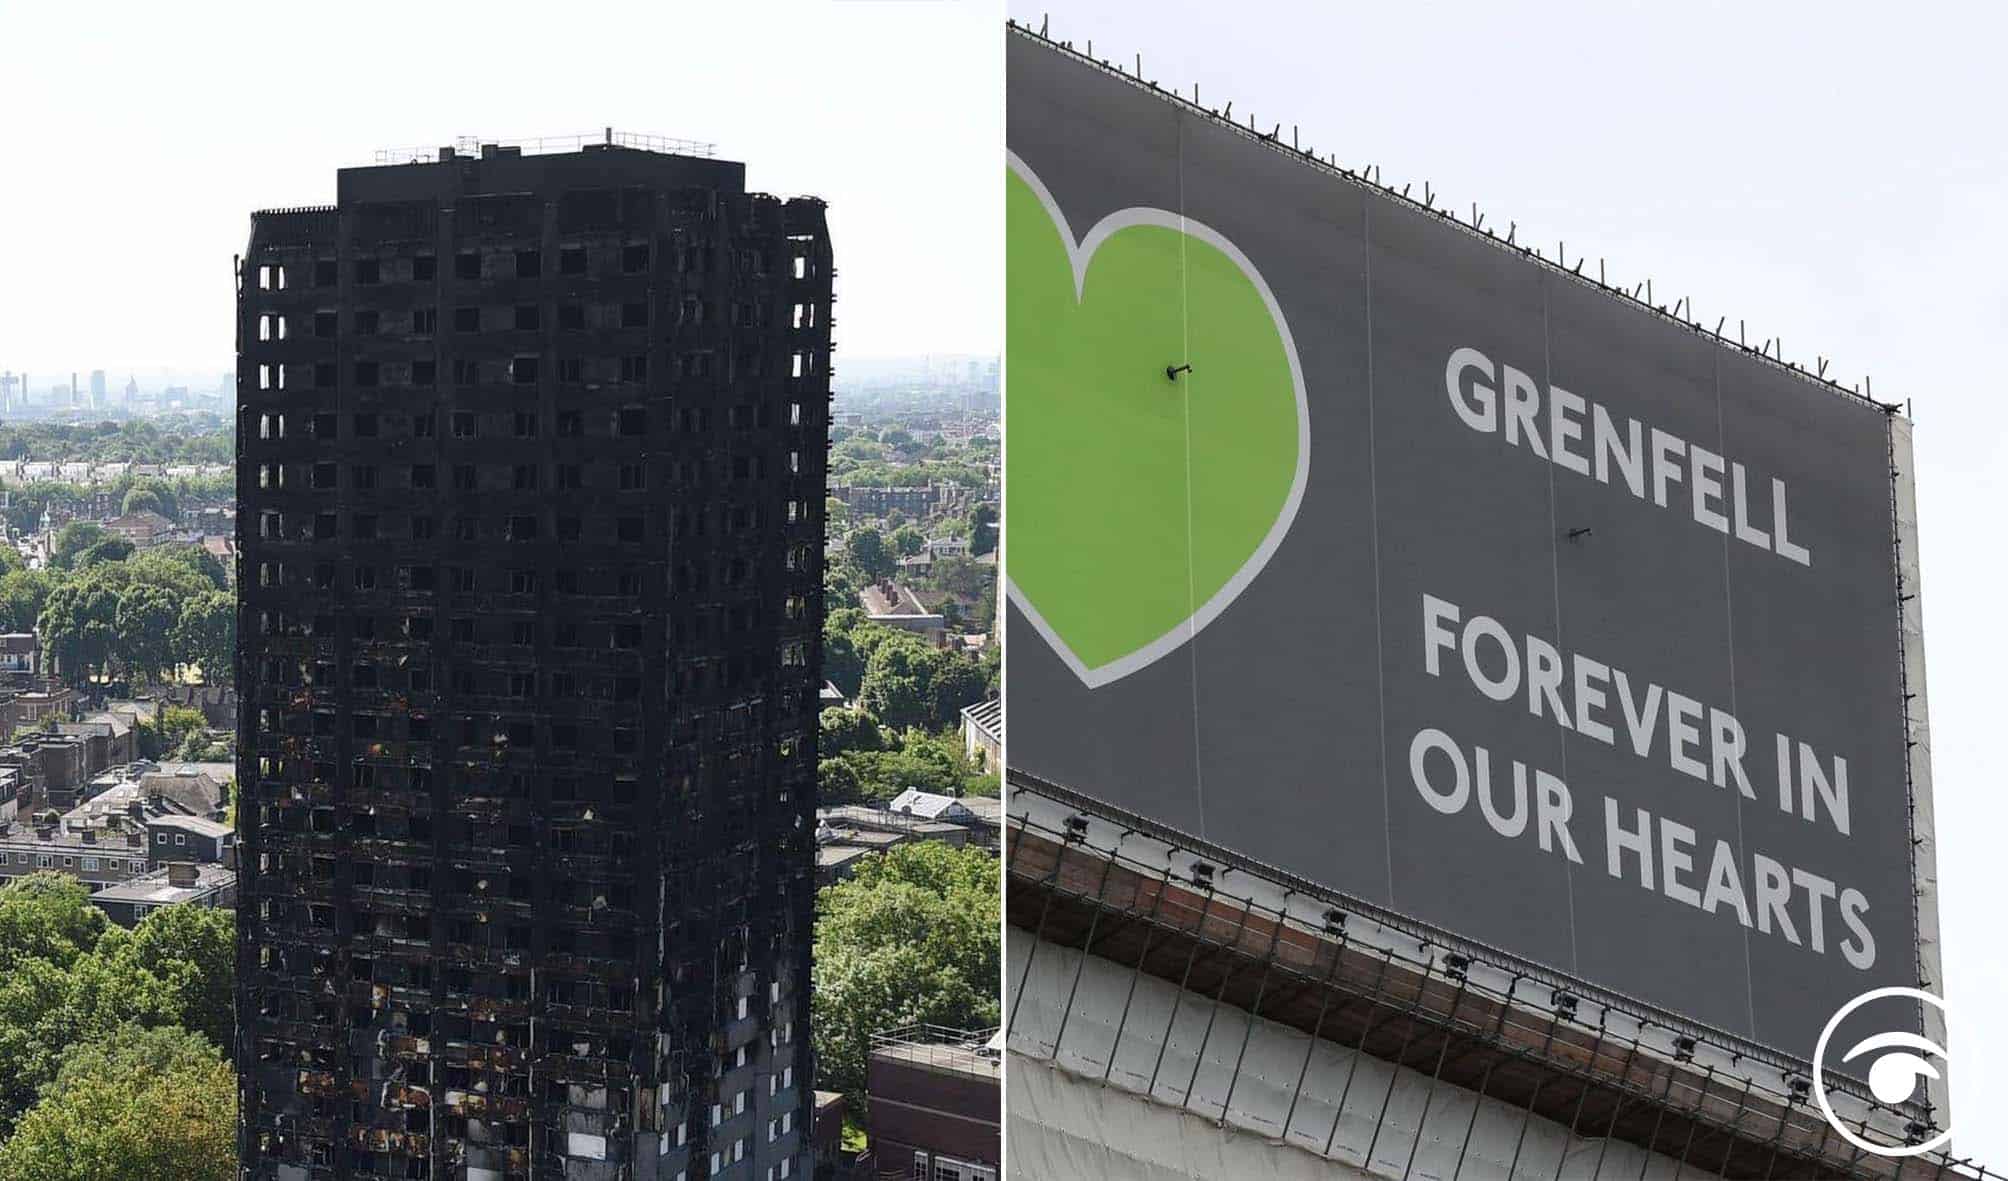 Watch: ‘They want Grenfell to be forgotten’: Fury at plans to demolish building